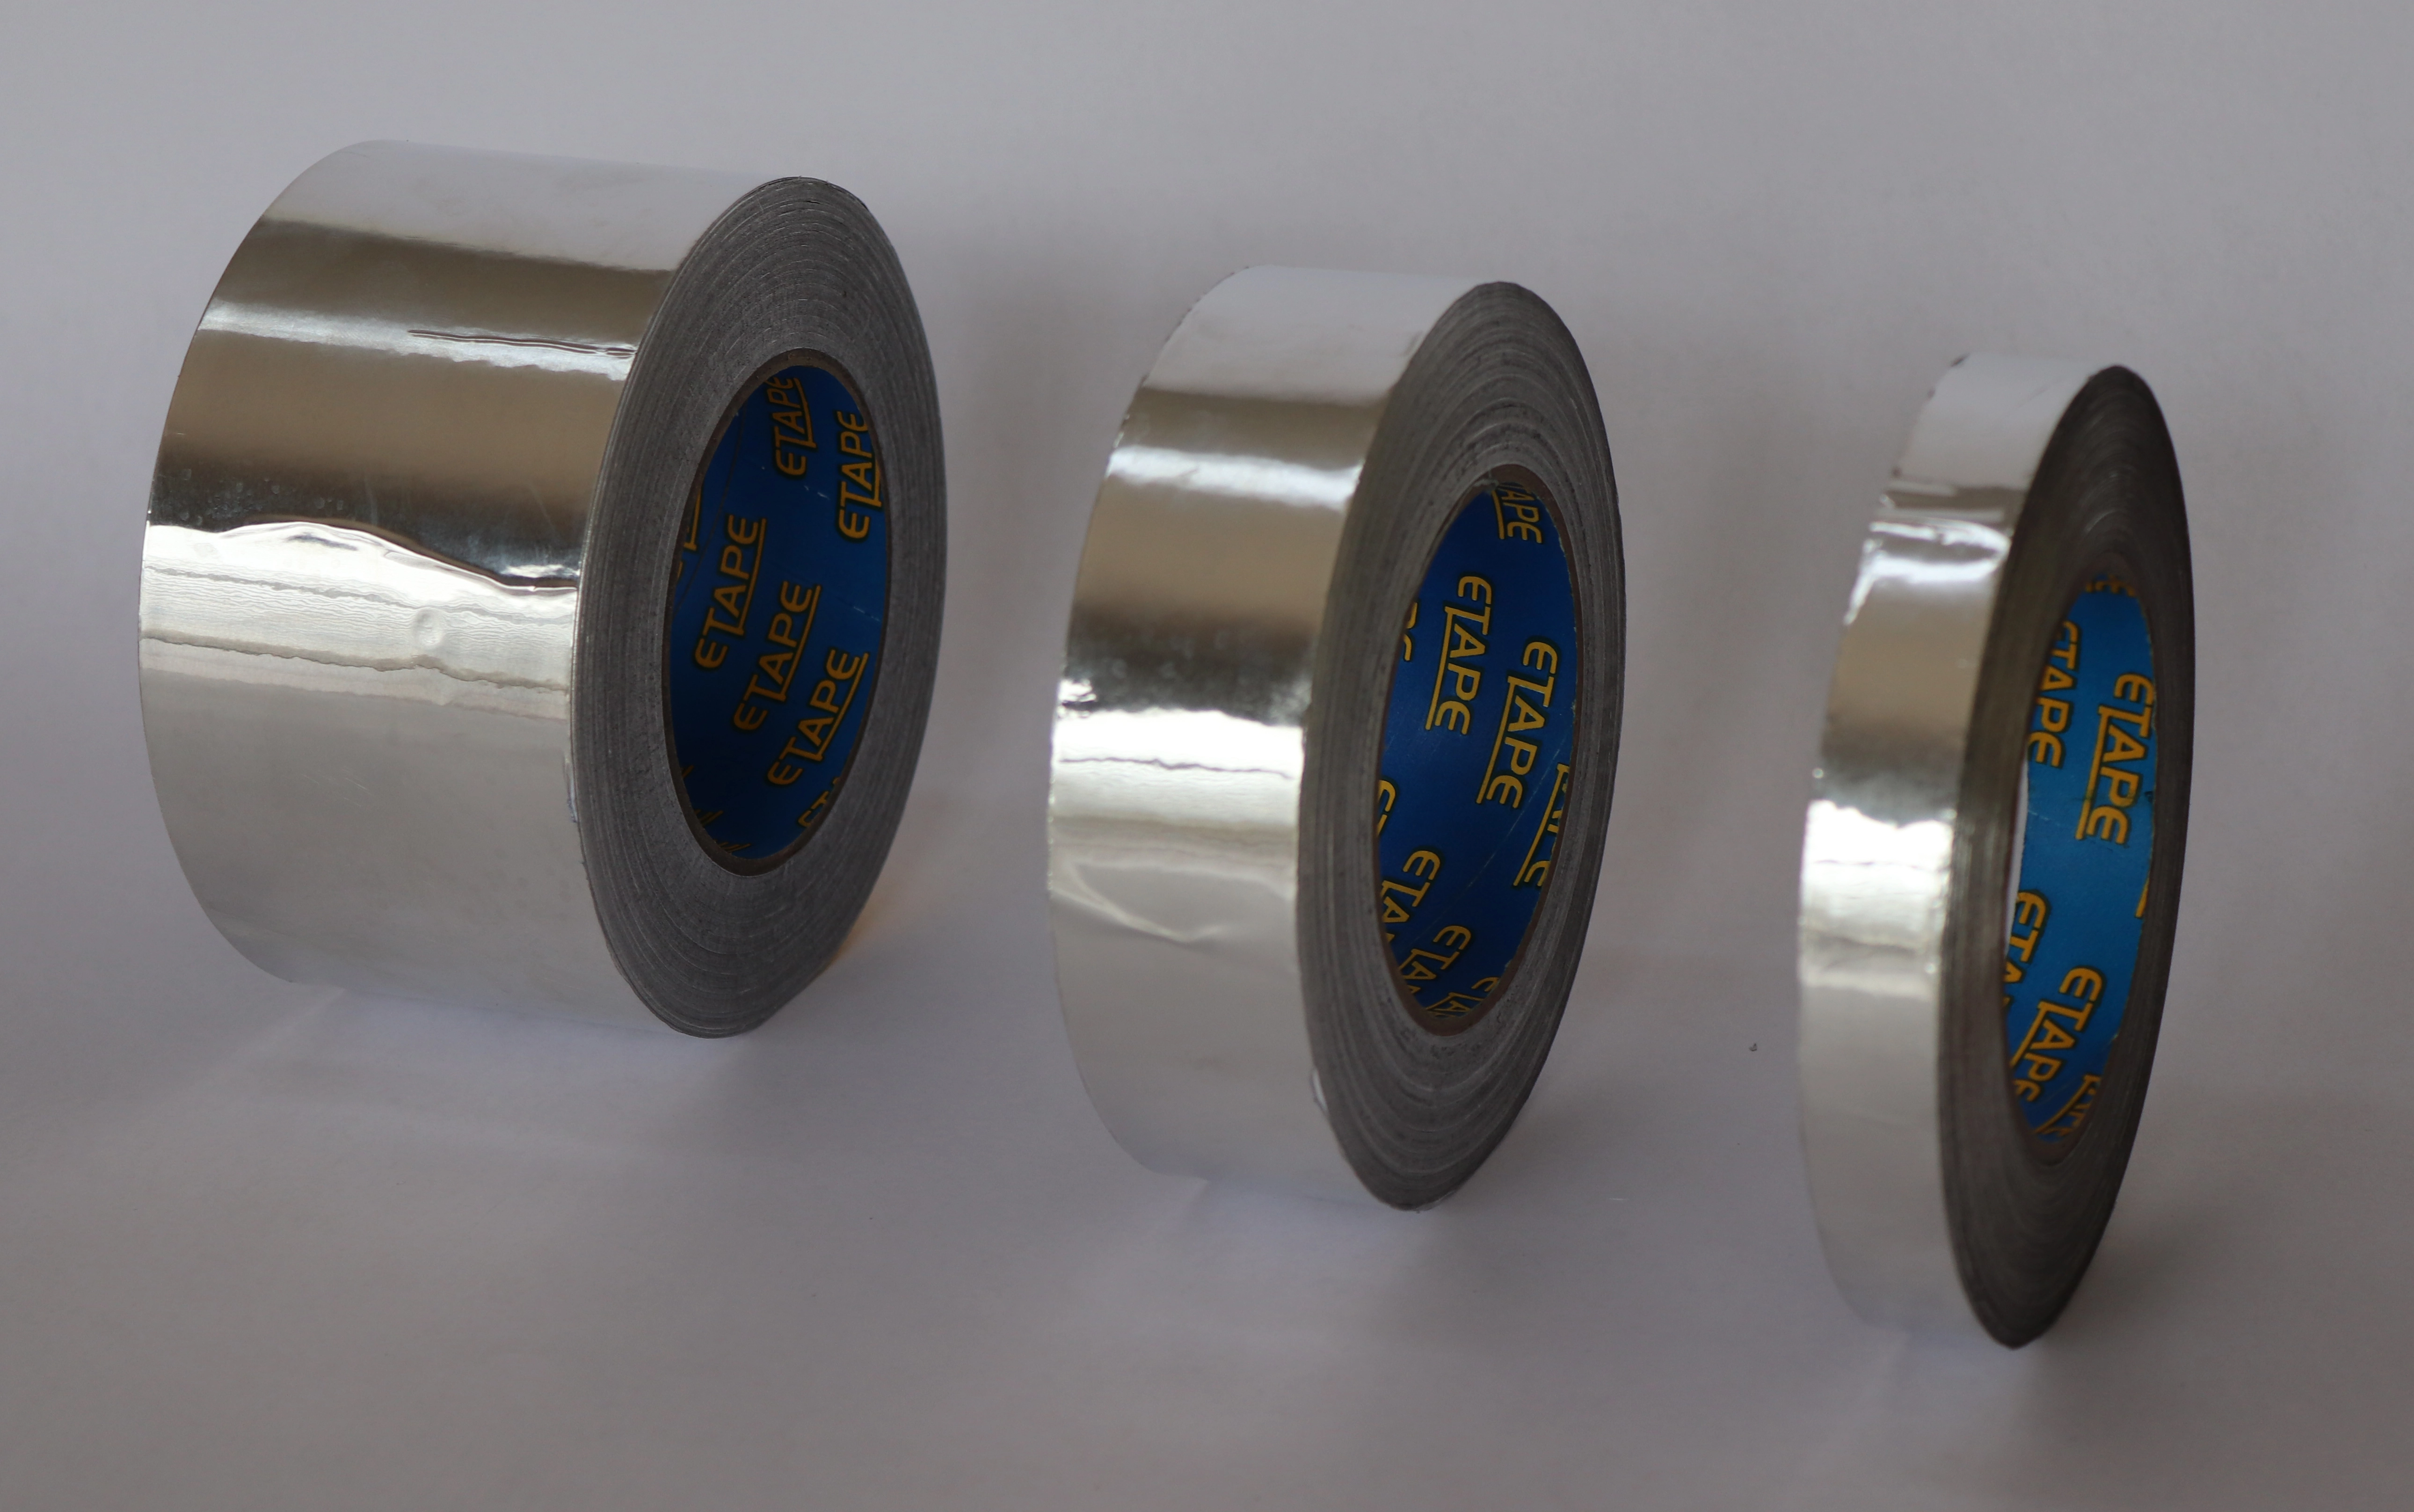 Aluminium foil tape shown off in different widths sold by Easitape